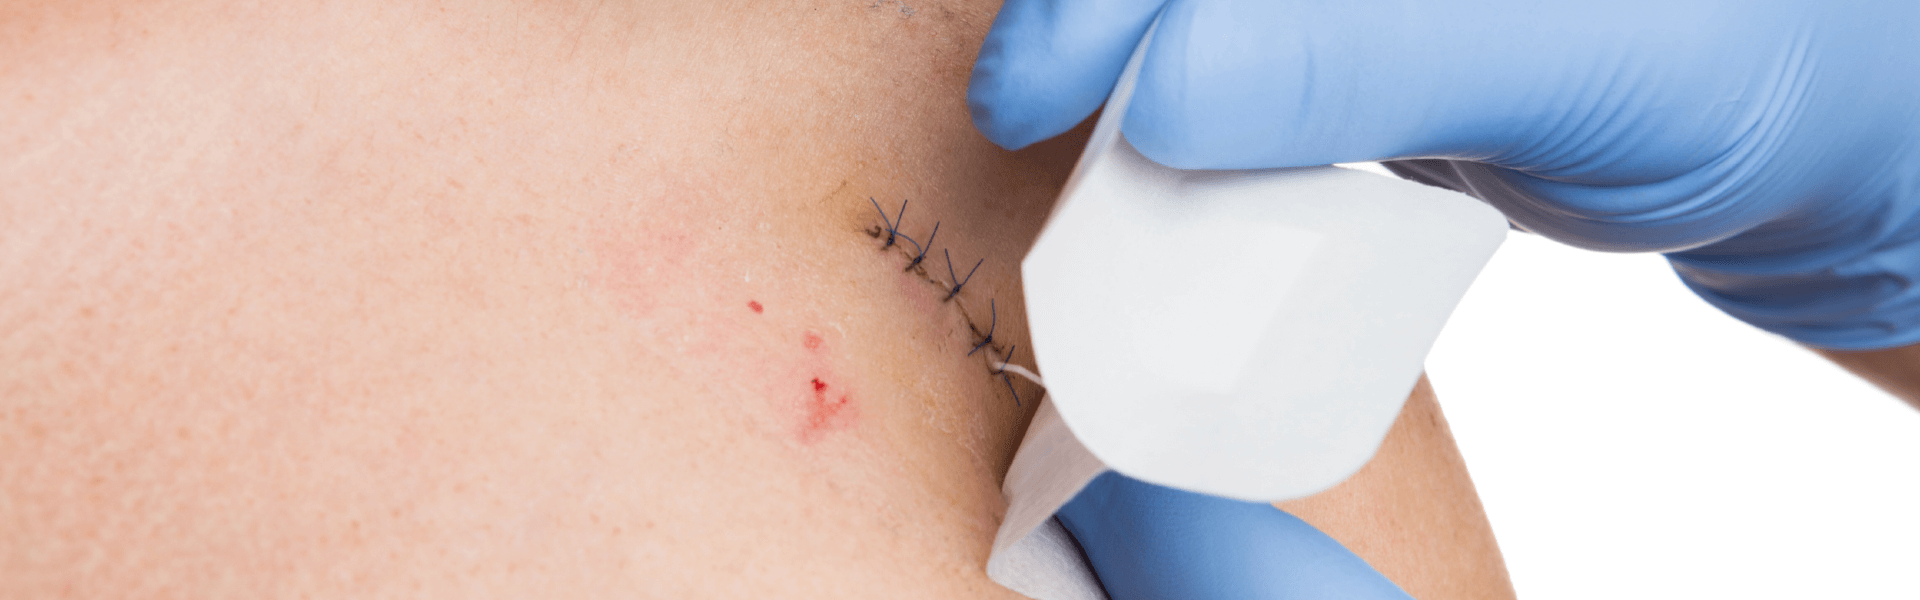 Suture Removal | Manipal Hospitals India